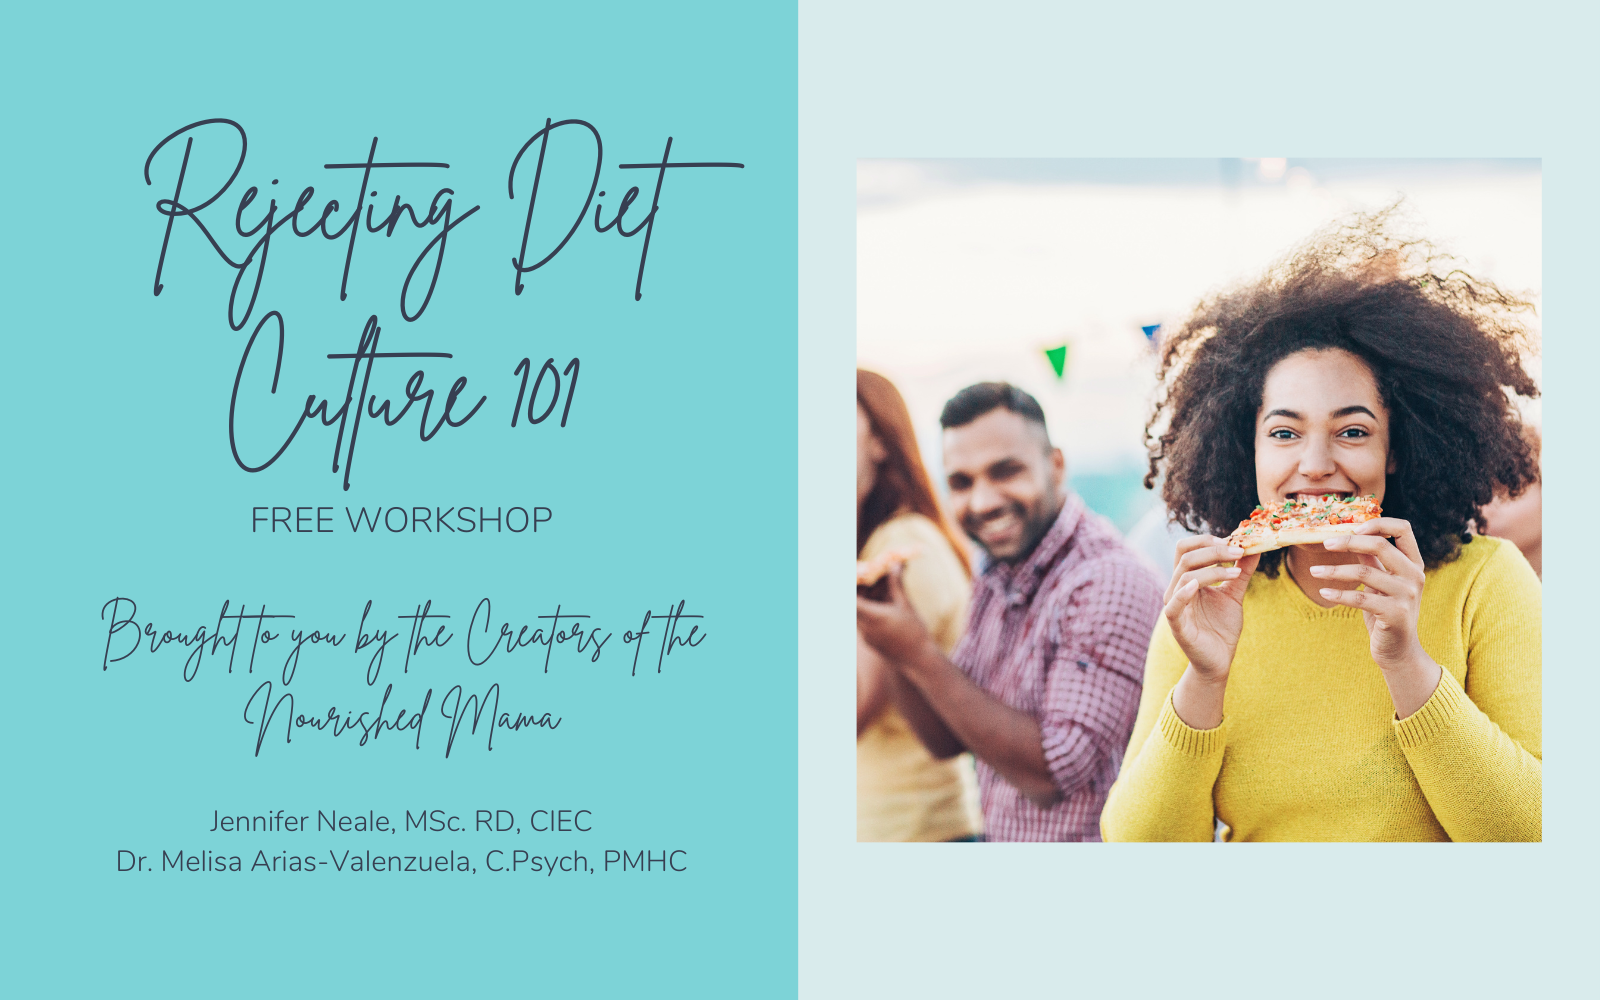 Rejecting Diet Culture 101 FREE Workshop Replay